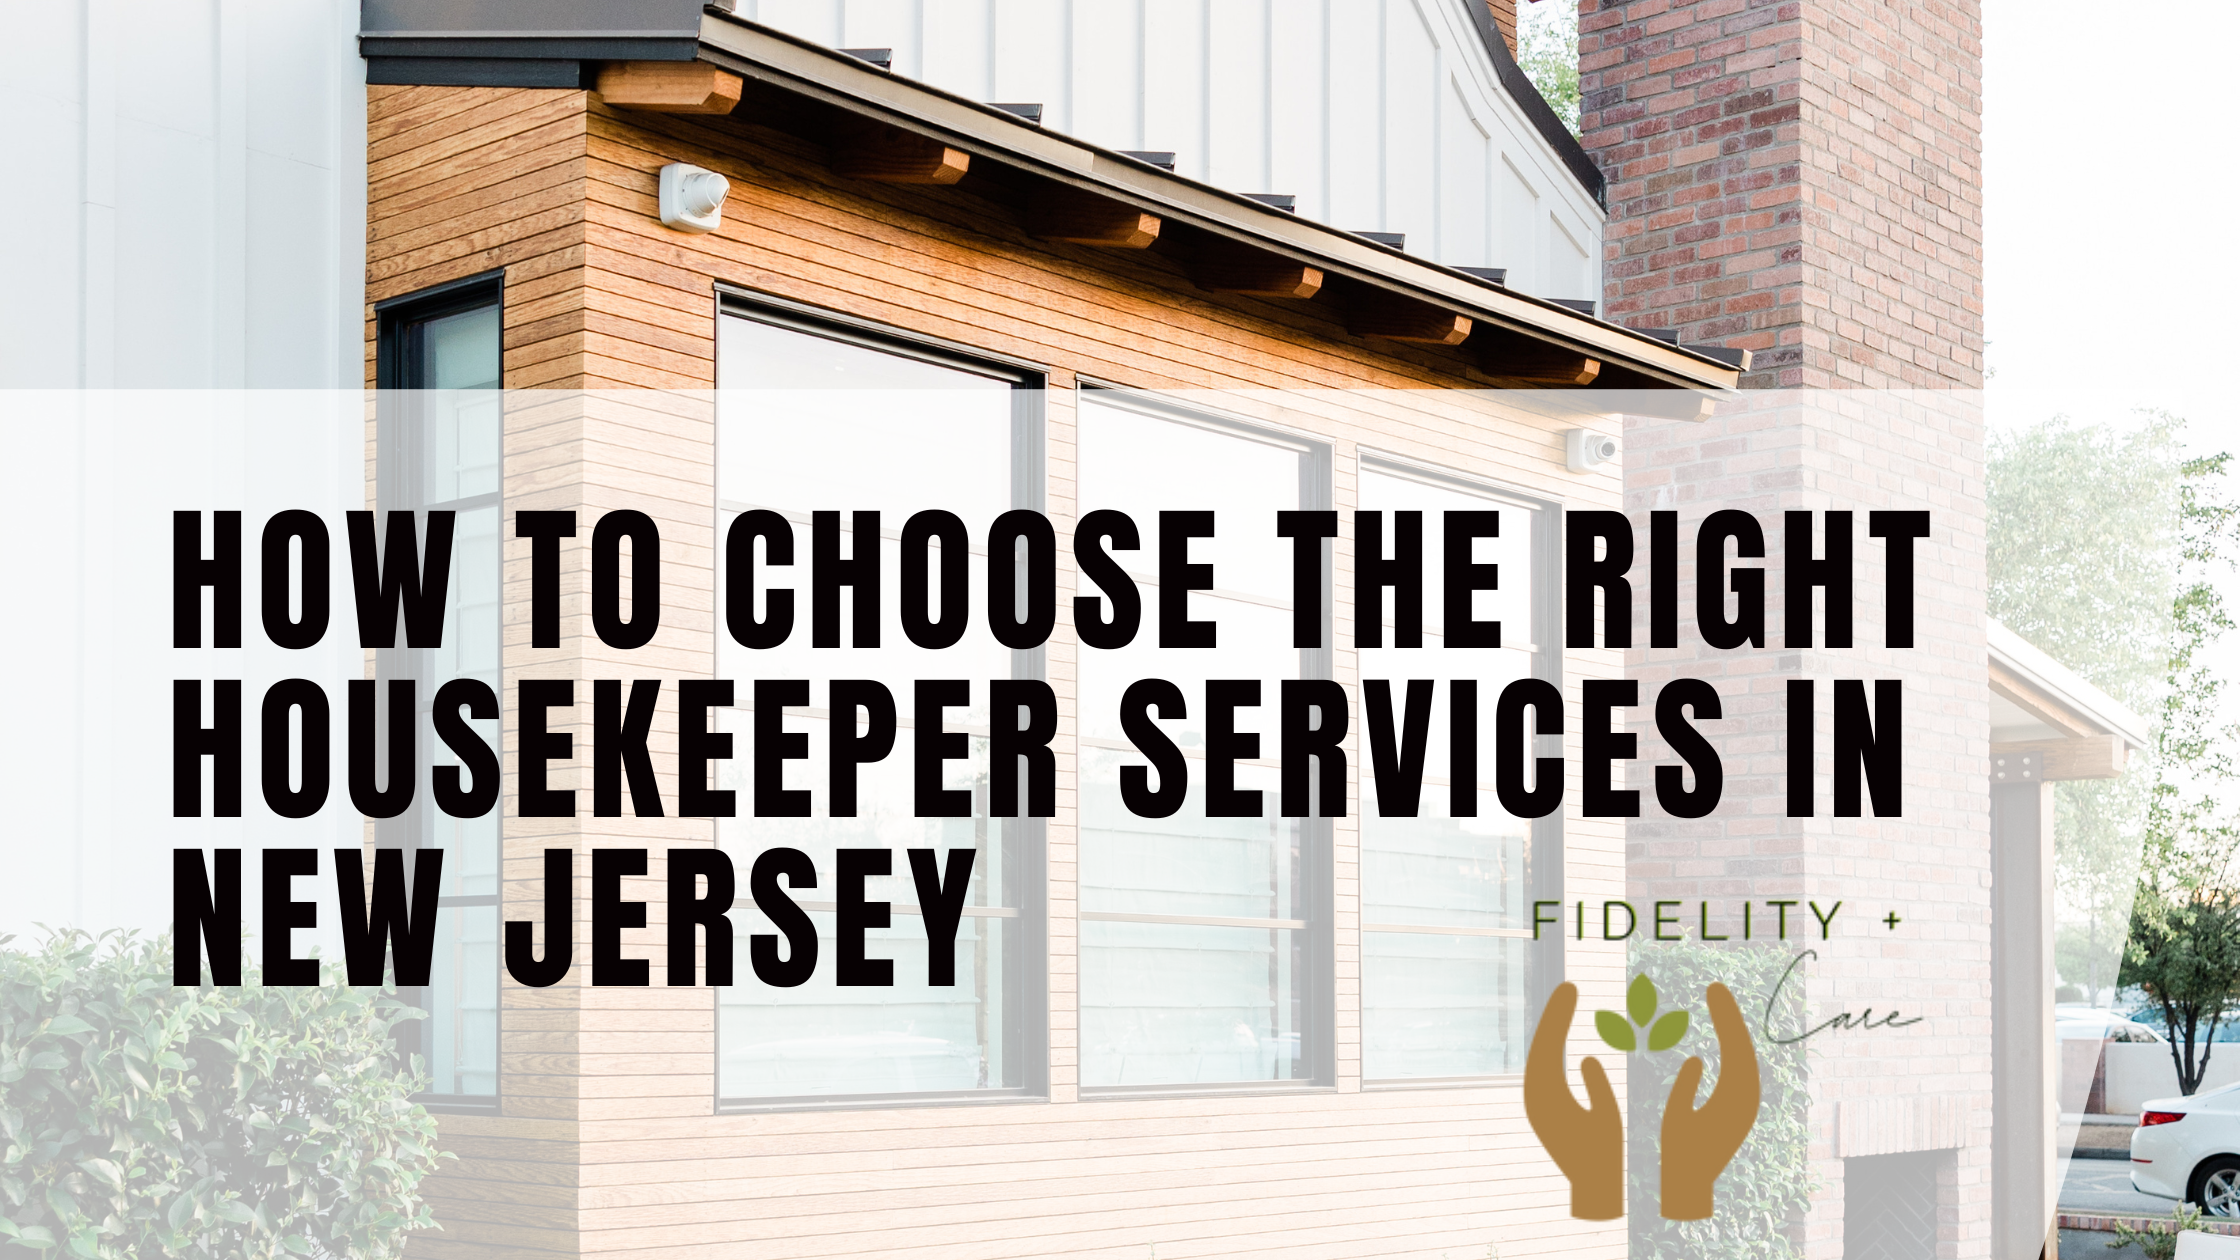 How To Choose The Right Housekeeper Services In New Jersey